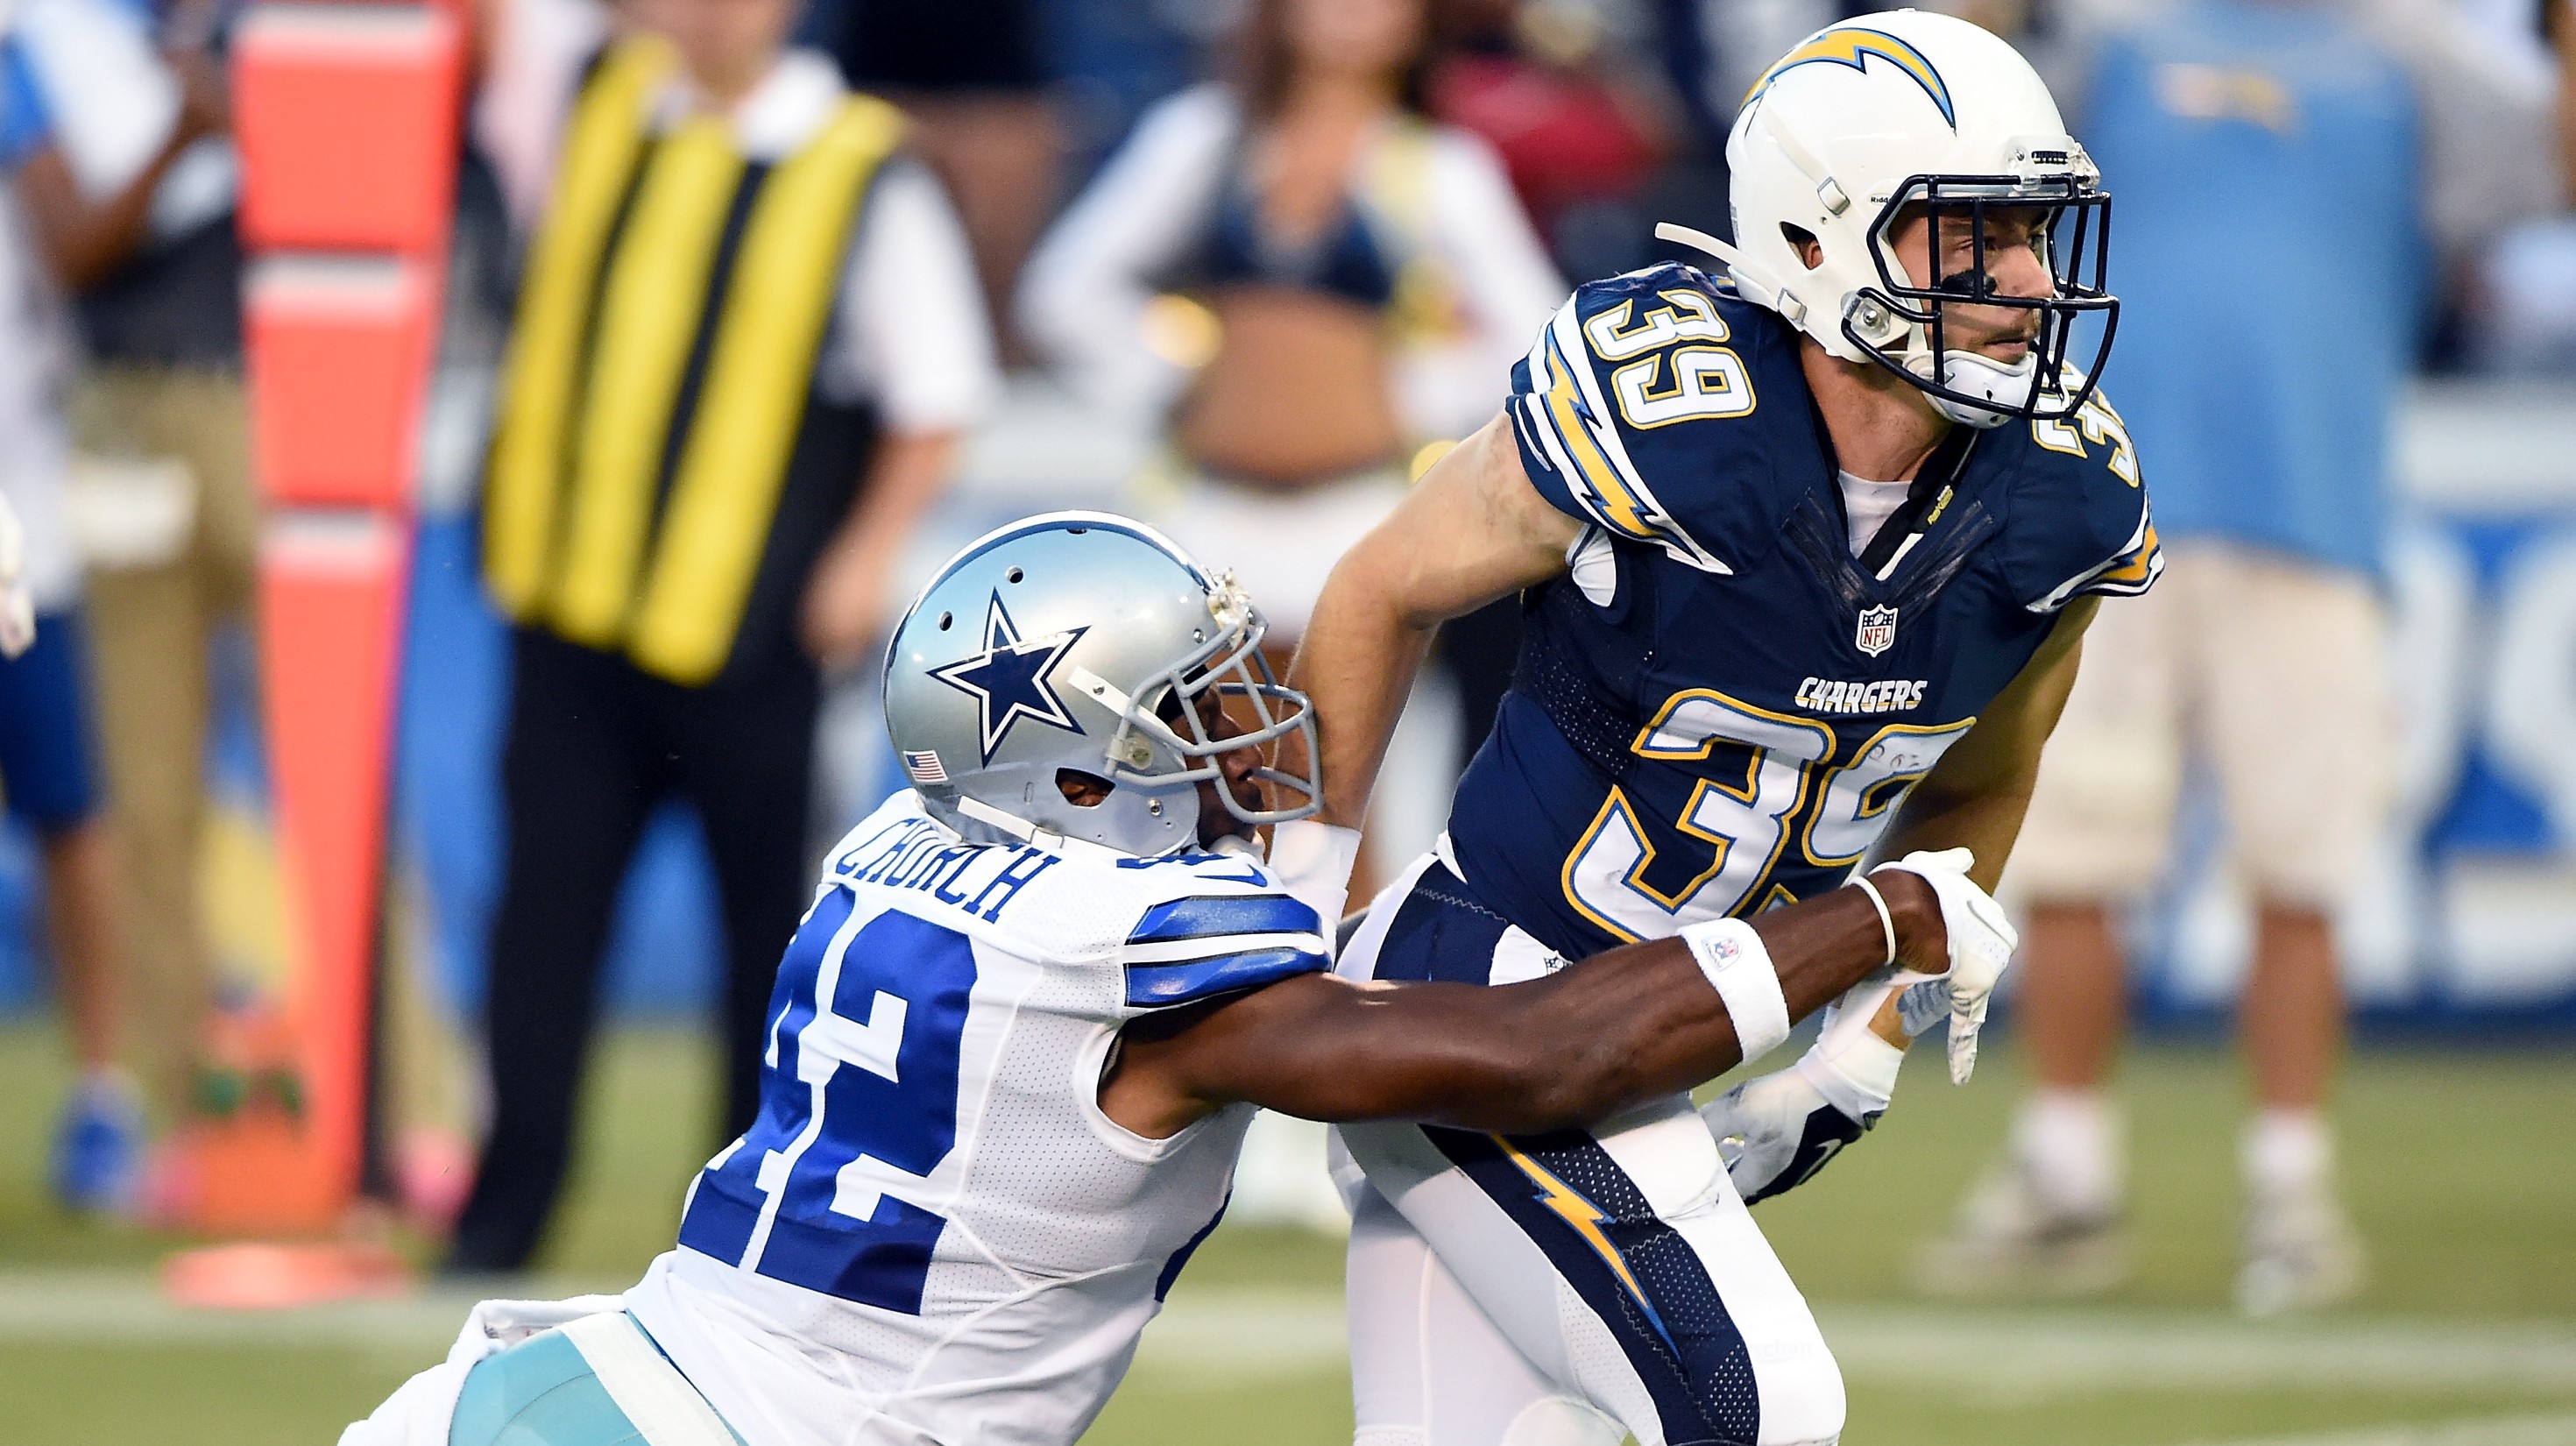 Cowboys vs. Chargers Score, Stats & Highlights